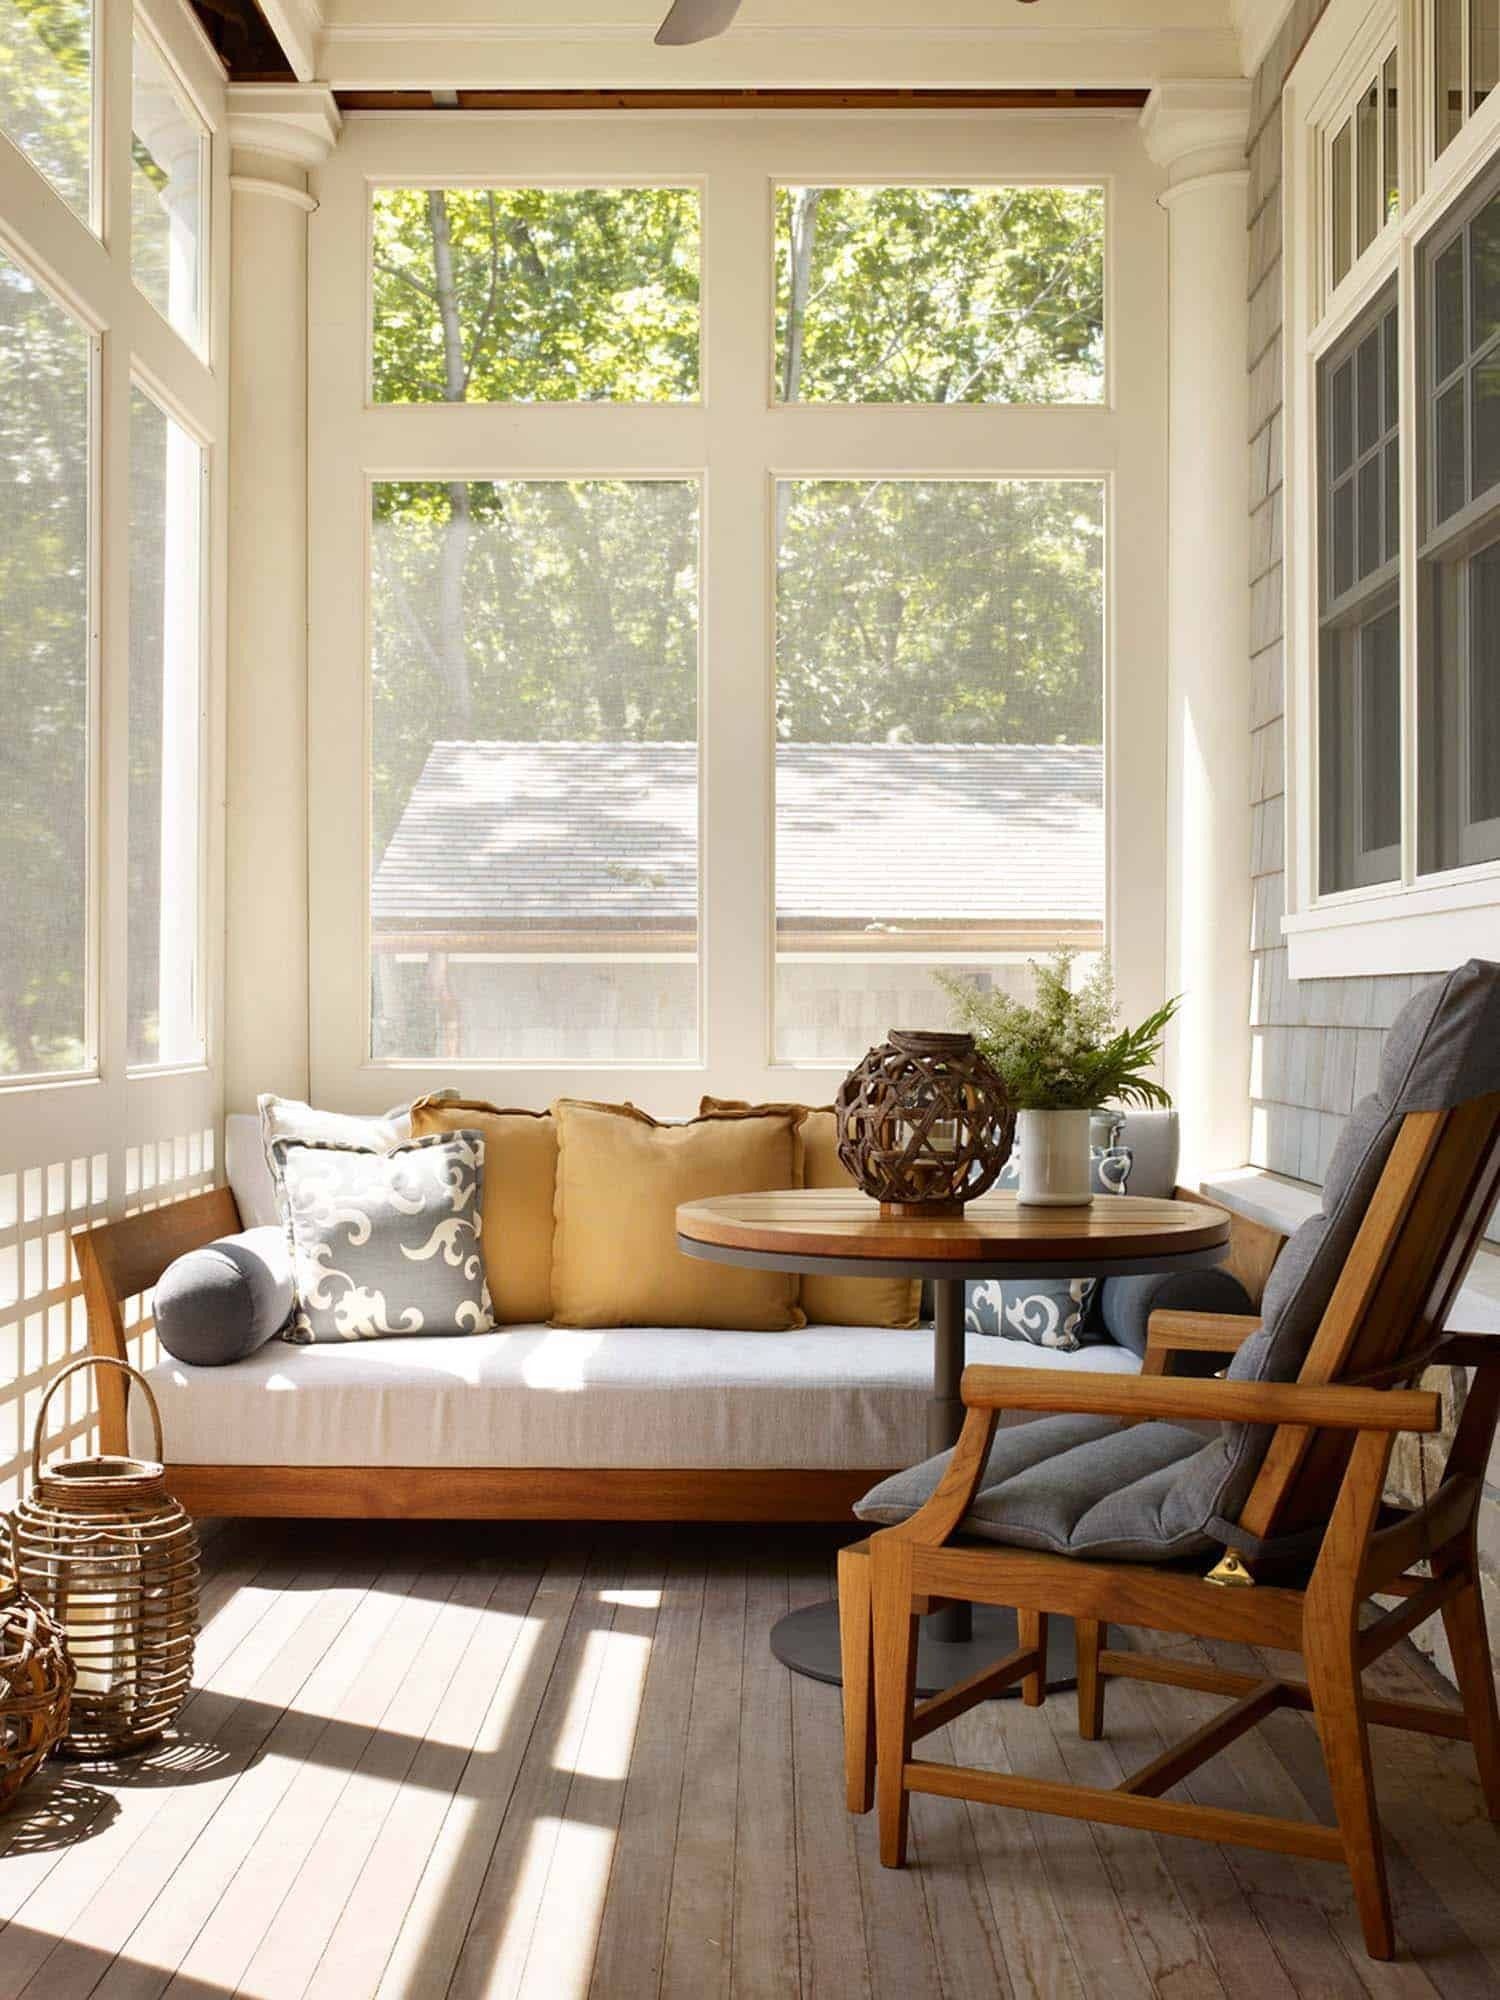 Charming Ways to Decorate a Small Screened-in Porch